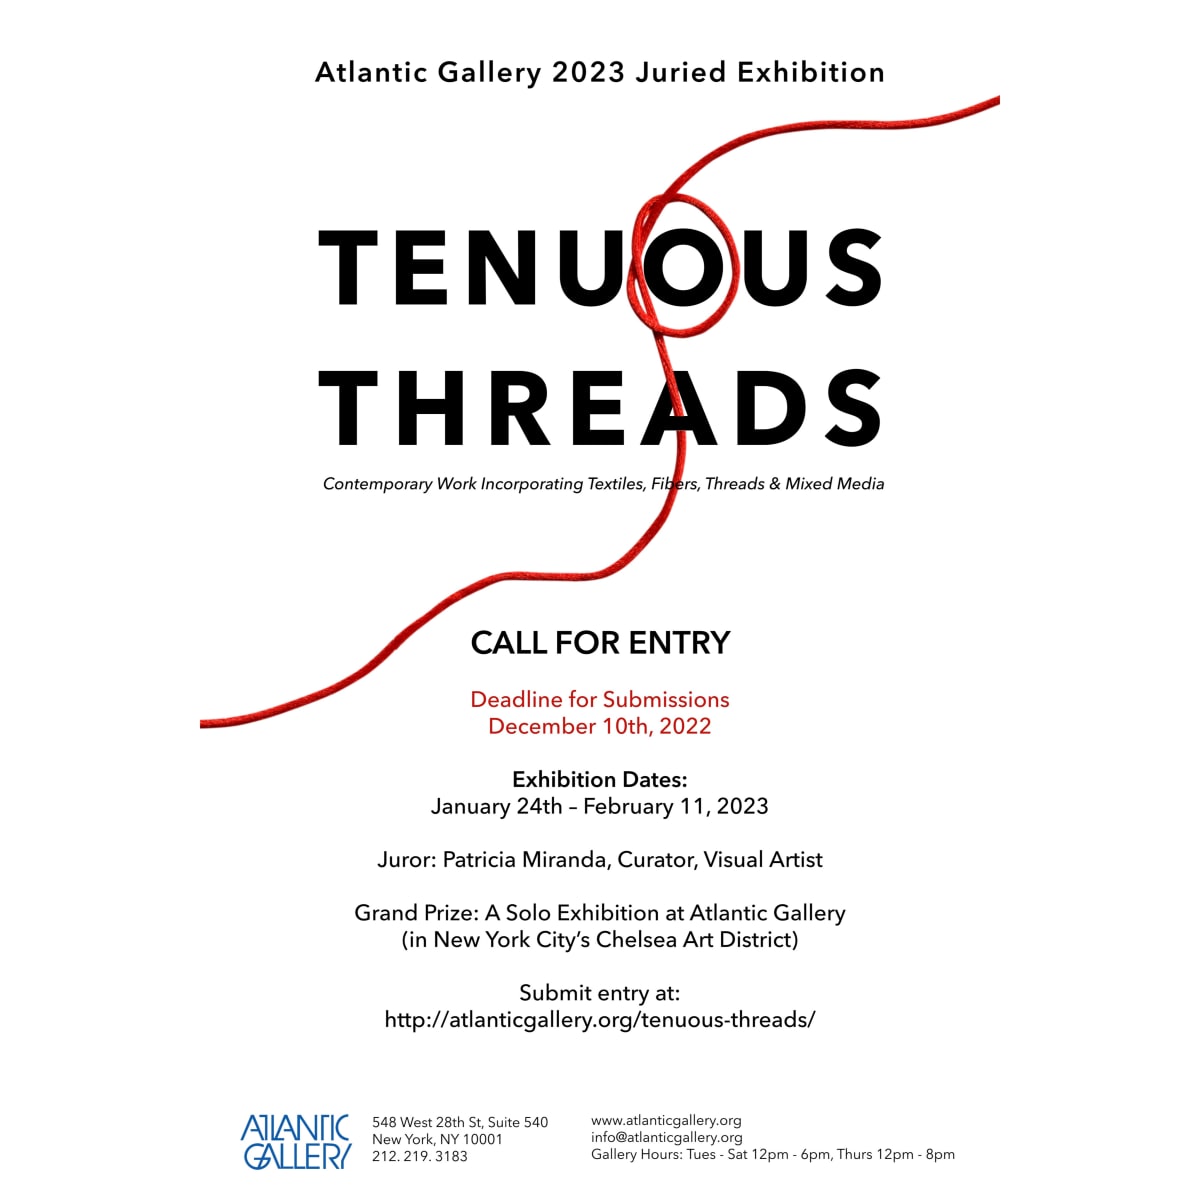 Tenuous Threads: Contemporary Work Incorporating Textiles, Fibers, Threads and Mixed Media